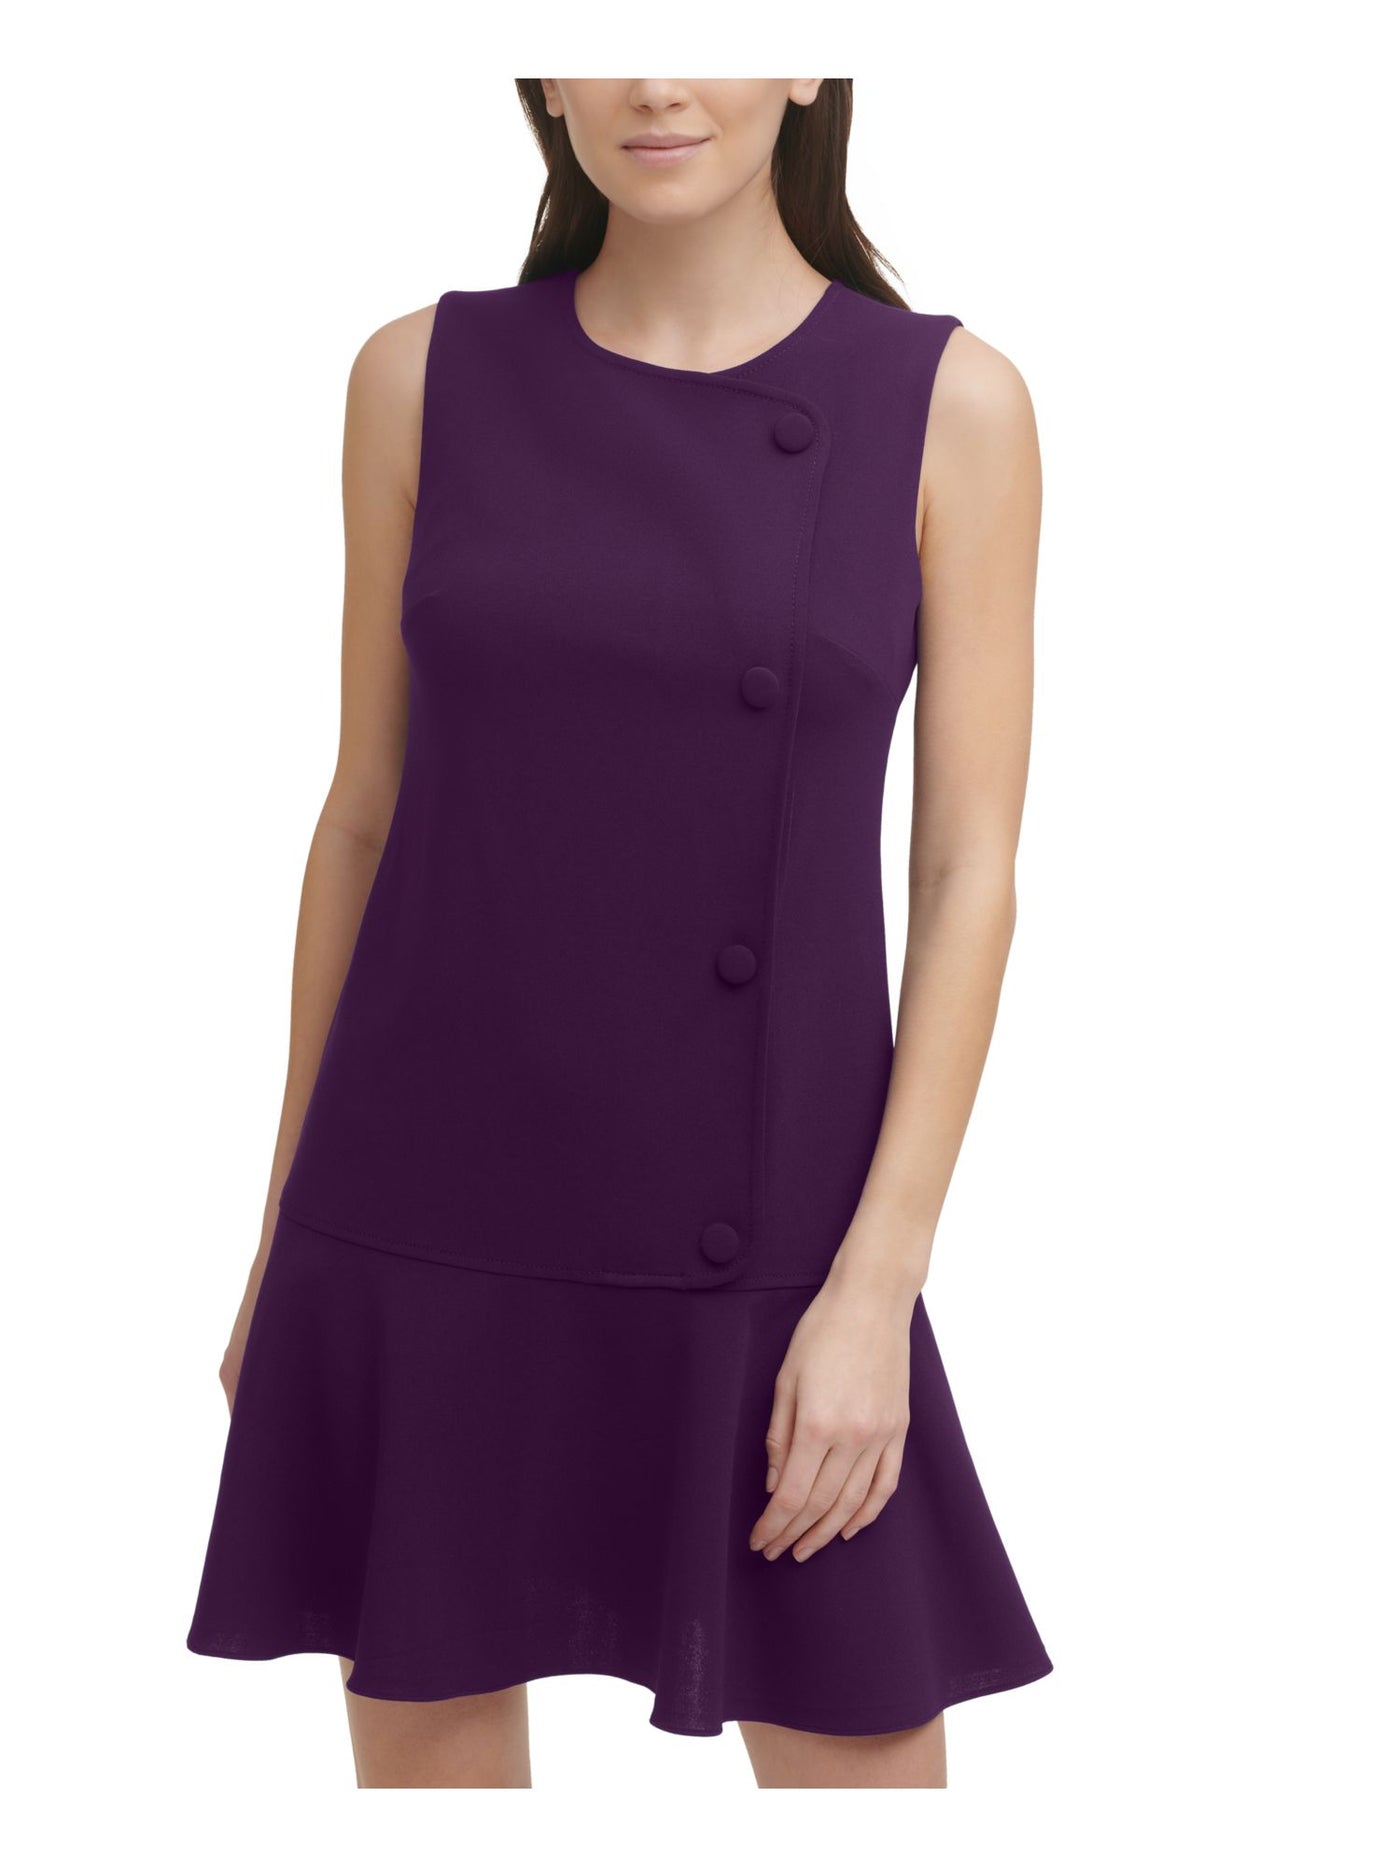 DKNY Womens Purple Stretch Zippered Fitted Faux Button Darted Sleeveless Round Neck Short Wear To Work Drop Waist Dress 10